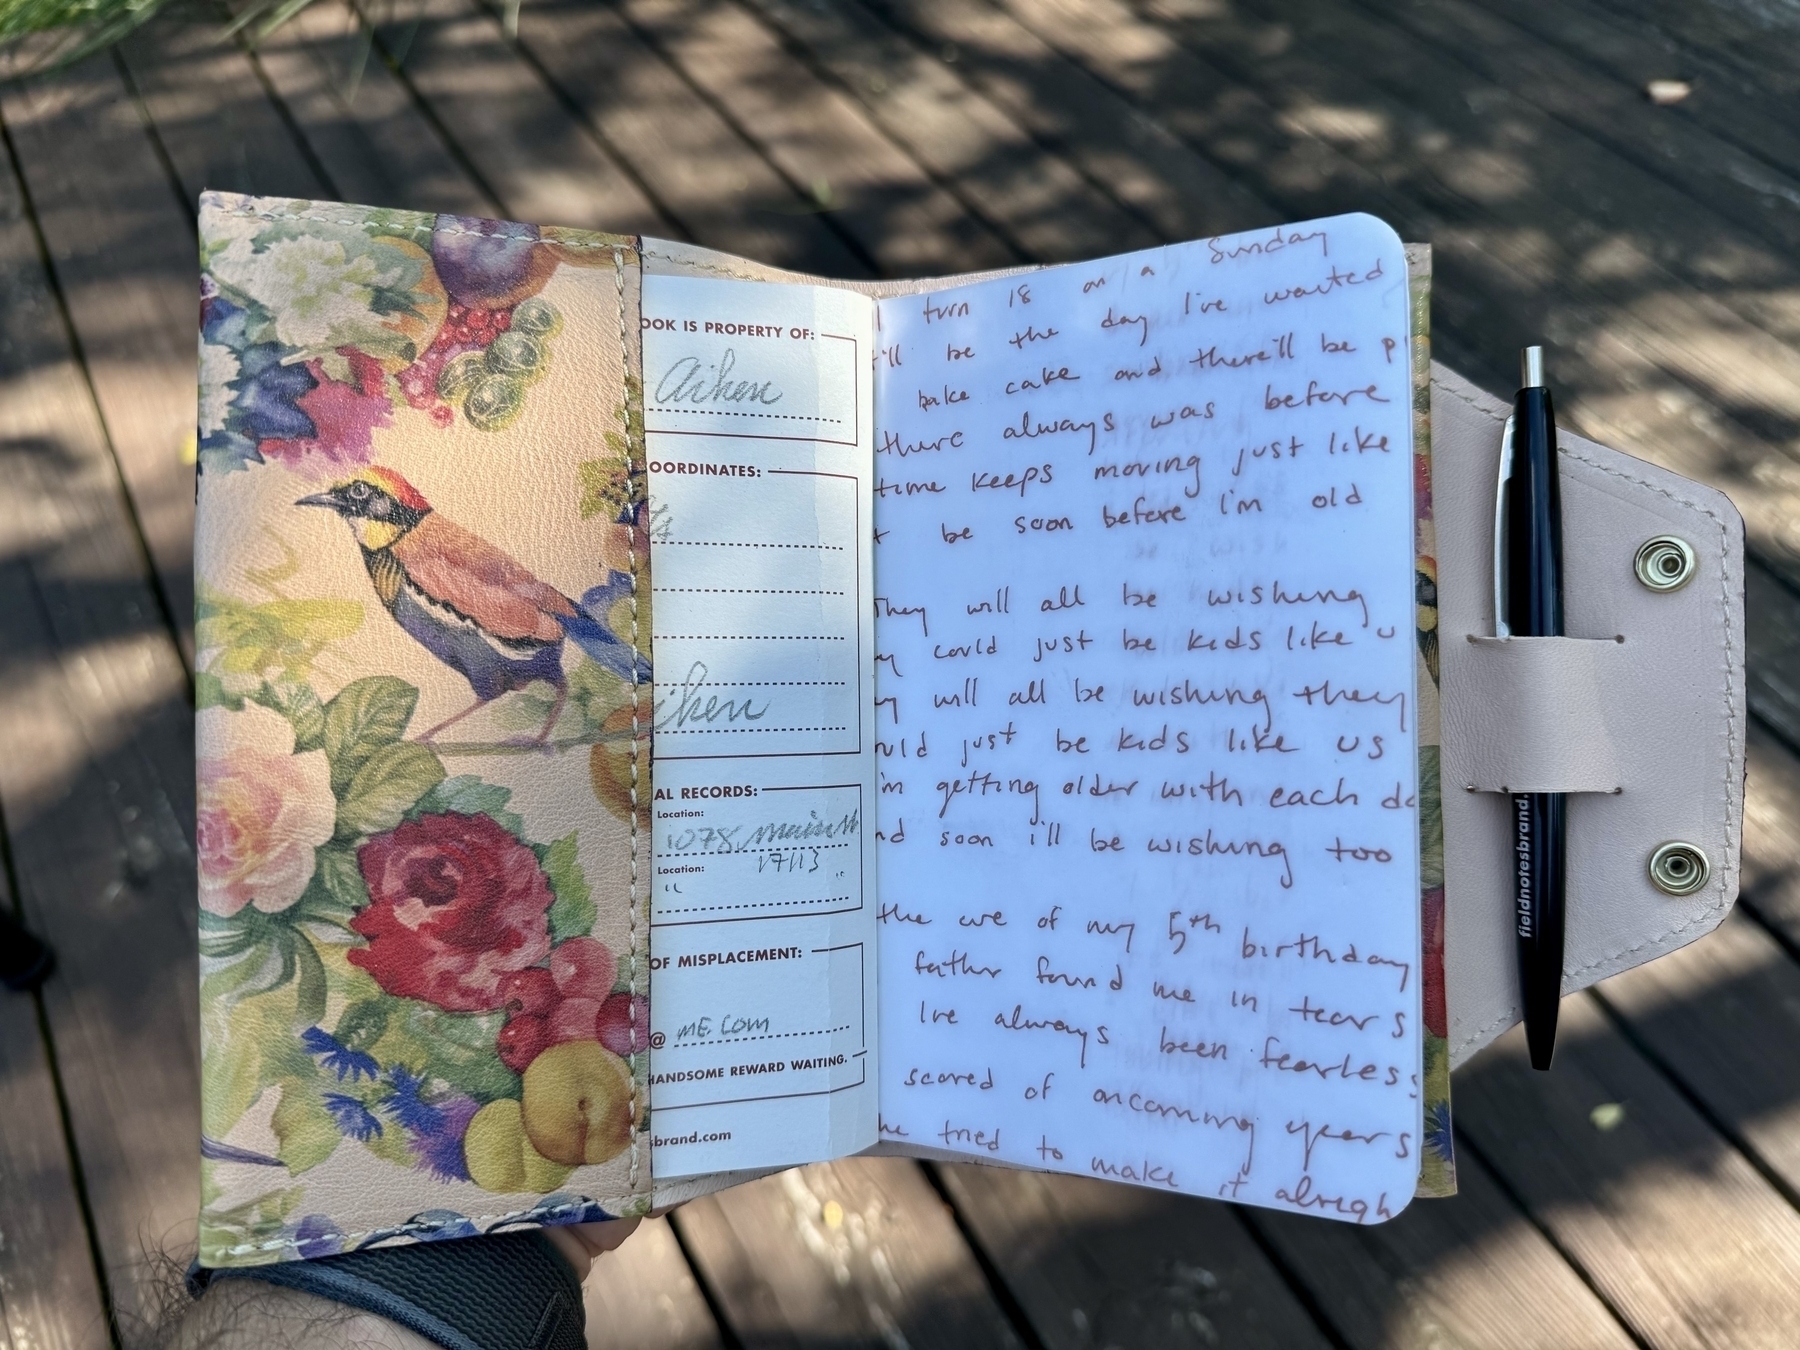 A colorful journal with a bird and floral cover is open to handwritten entries and includes a pen attached to the side.